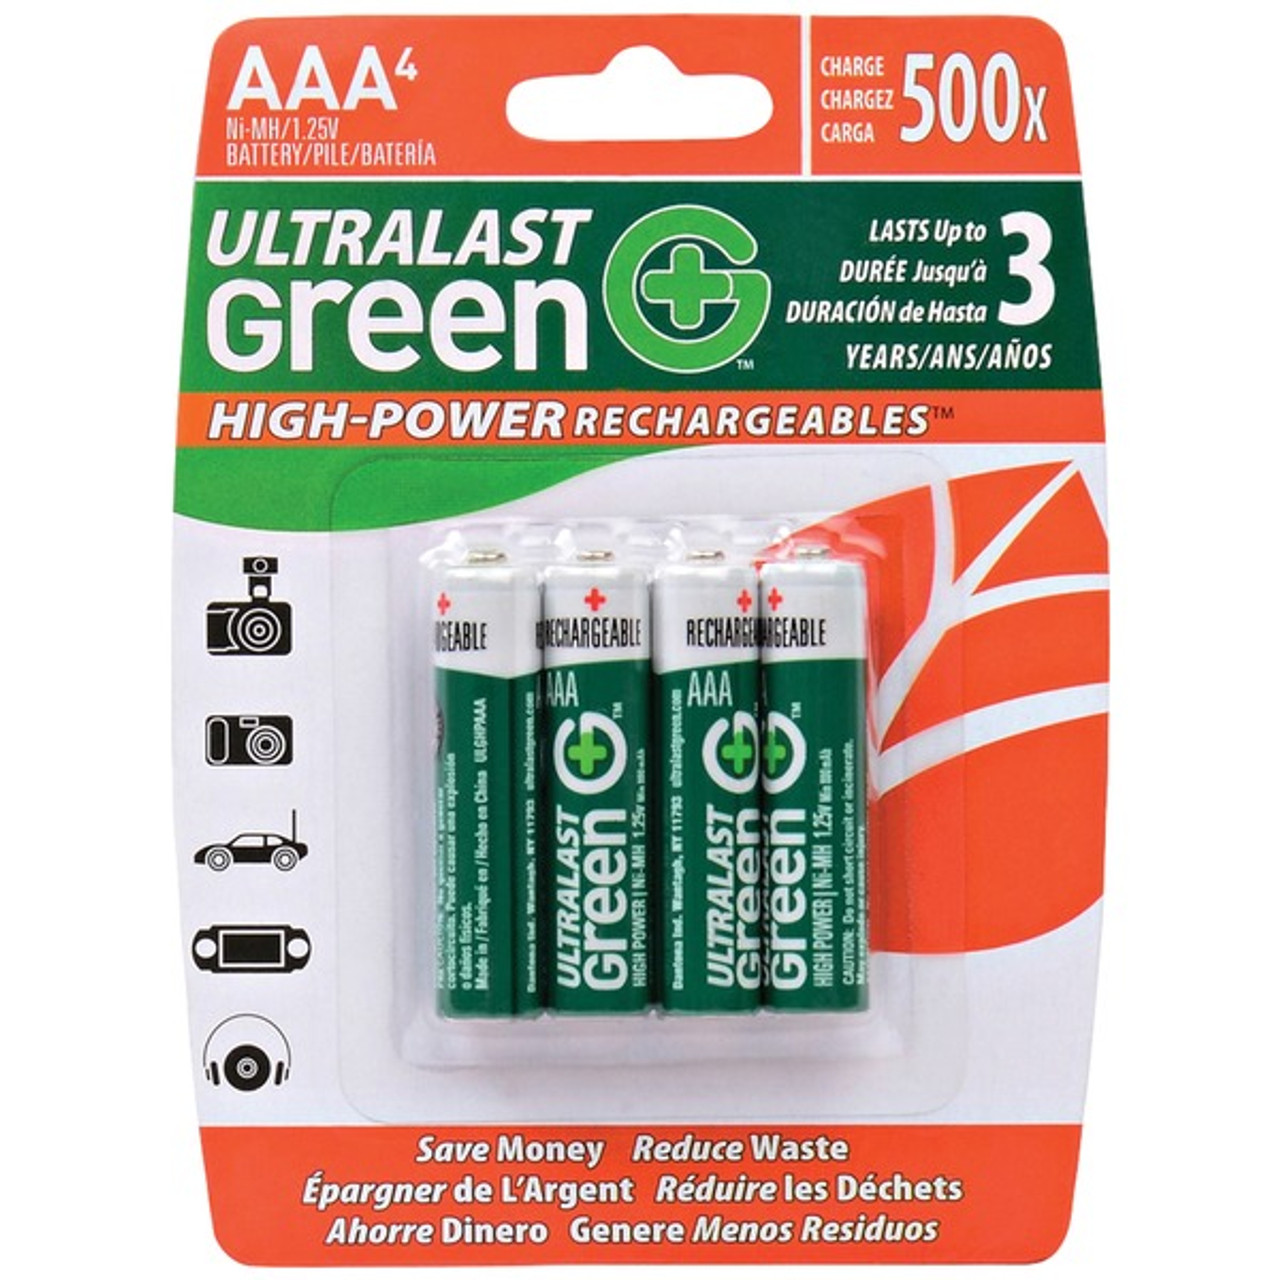 Green High-Power Rechargeables AAA NiMH Batteries (4 Pack)